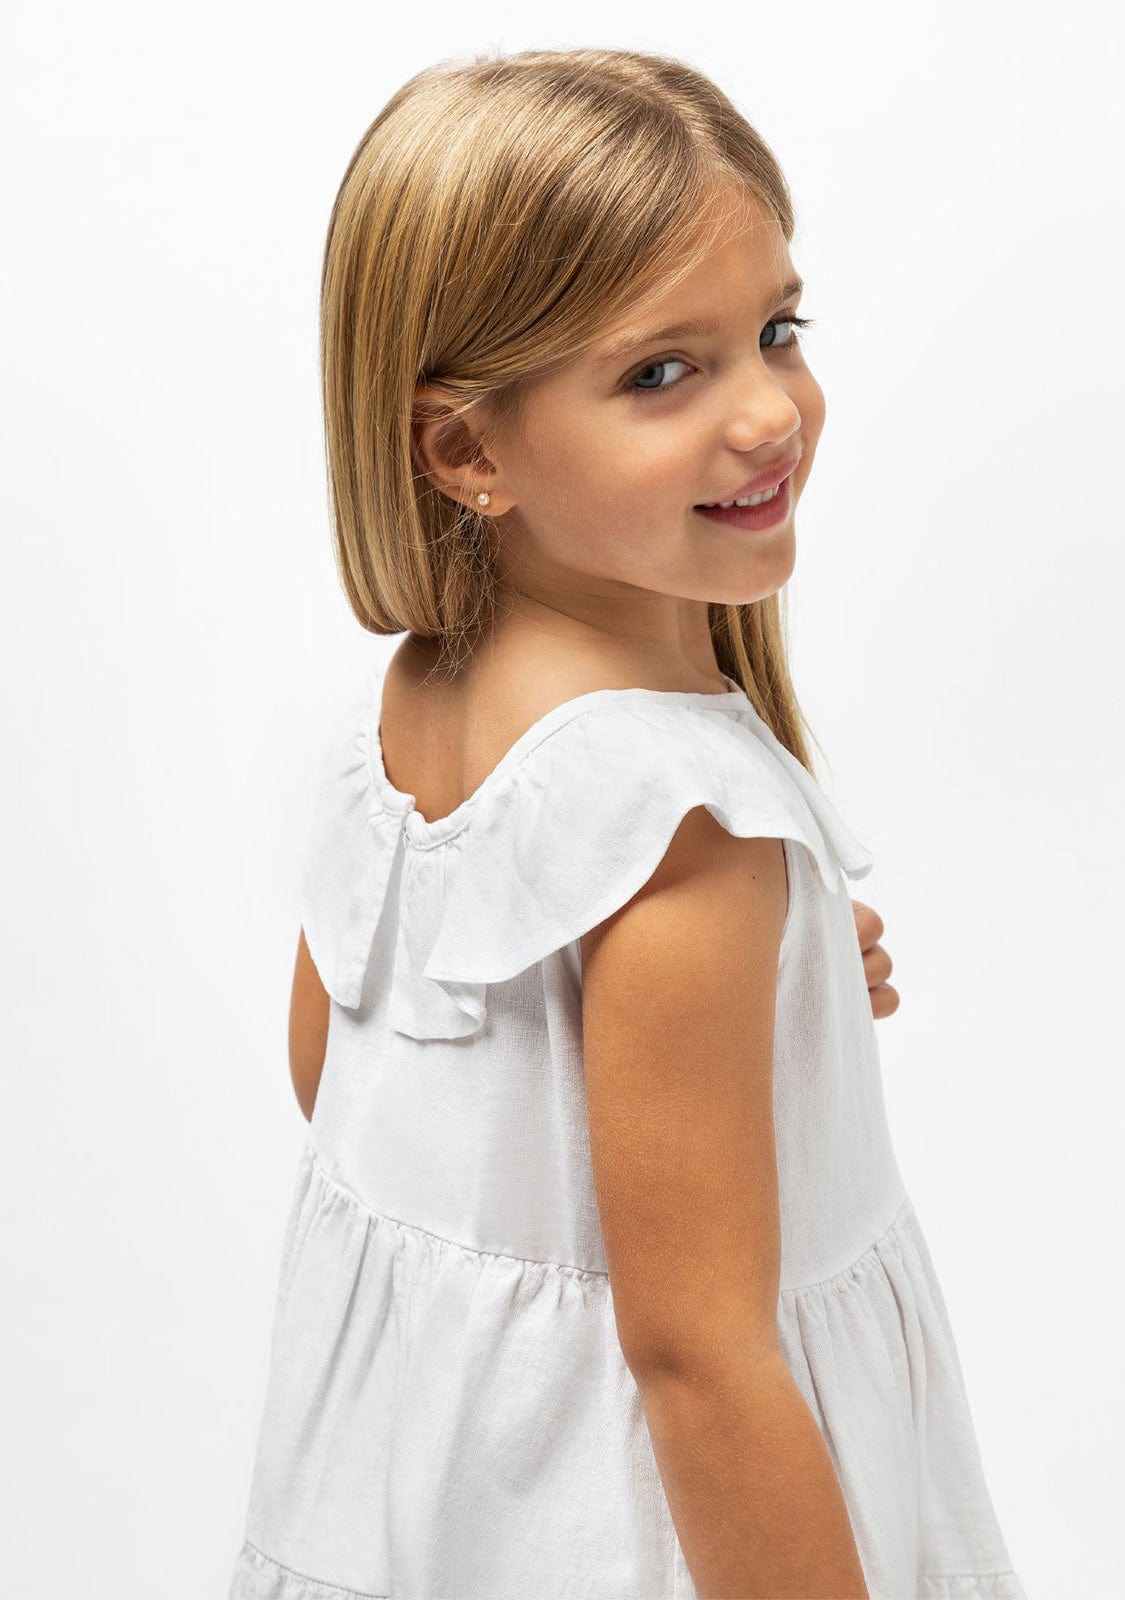 CONGUITOS TEXTIL Clothing Girl's White Ruffled Dress